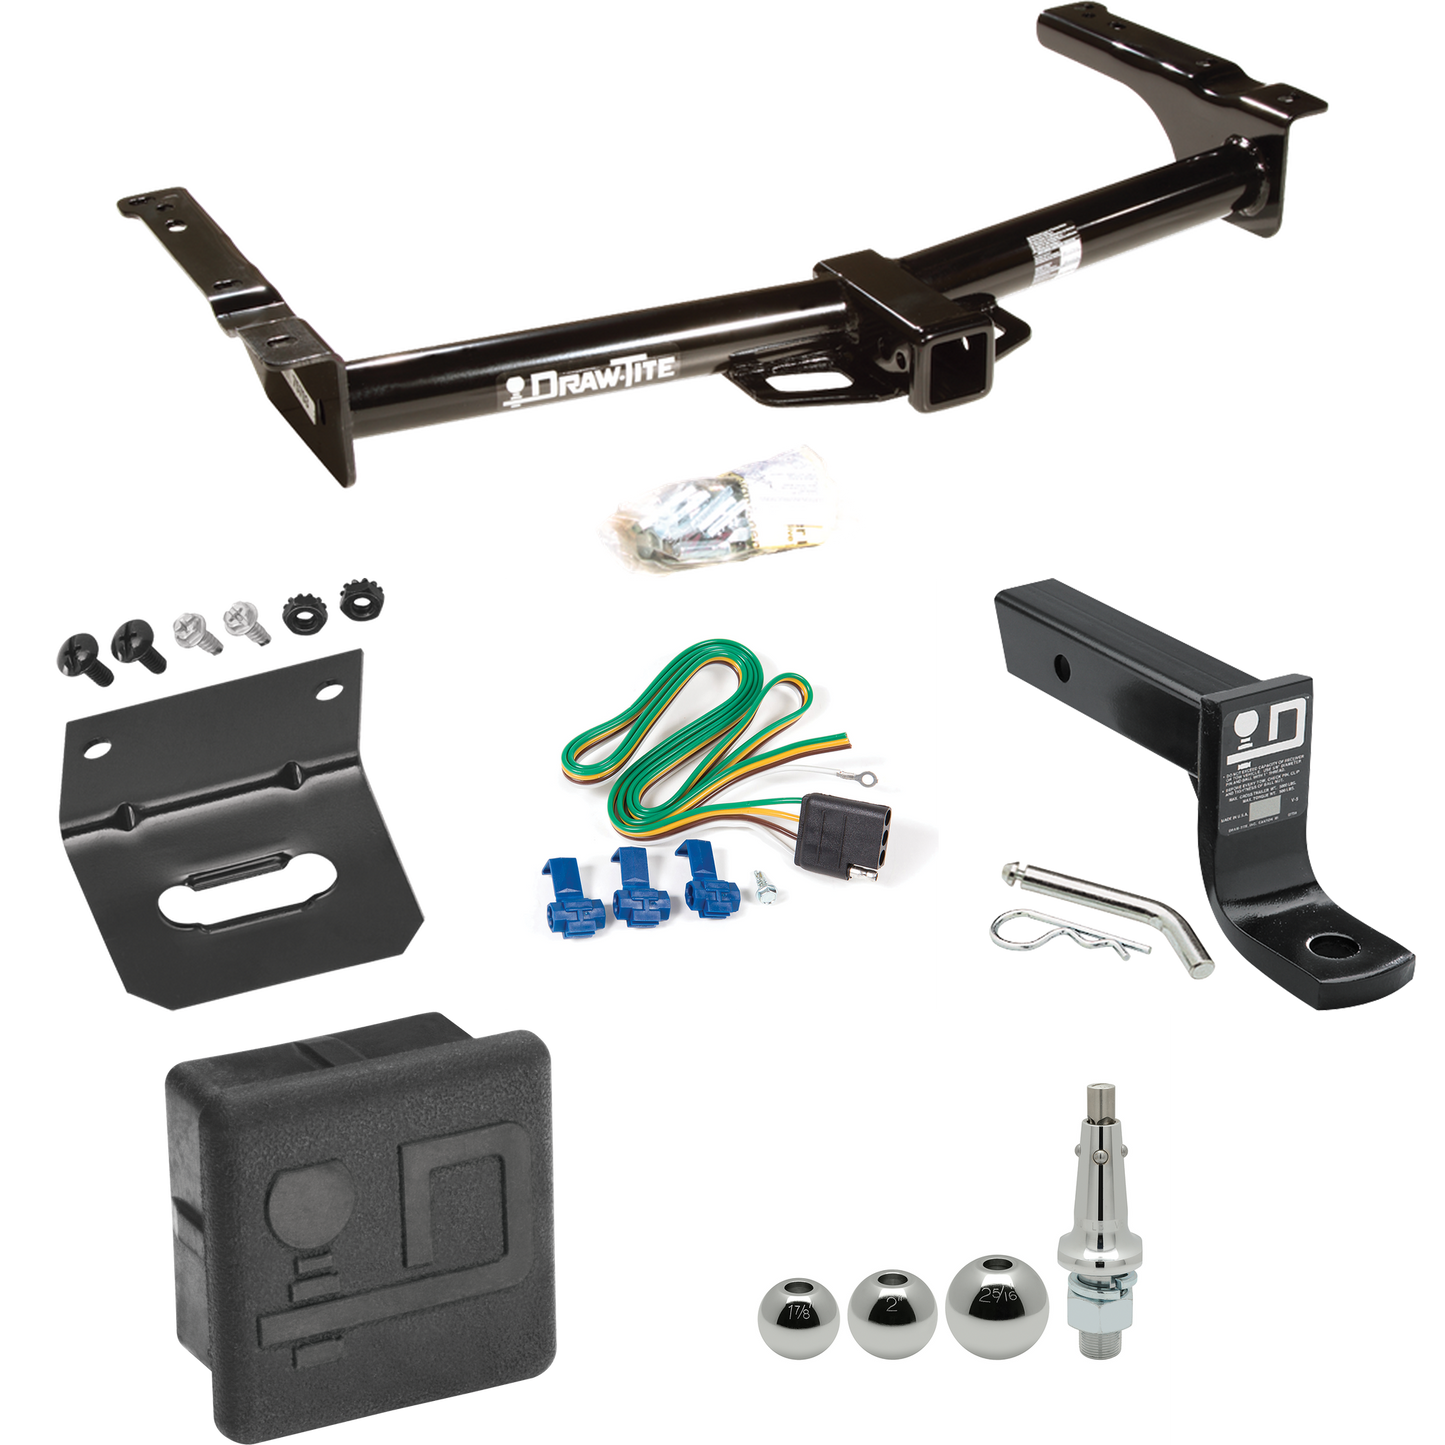 Fits 1975-1983 Ford E-100 Econoline Trailer Hitch Tow PKG w/ 4-Flat Wiring + Ball Mount w/ 4" Drop + Interchangeable Ball 1-7/8" & 2" & 2-5/16" + Wiring Bracket + Hitch Cover By Draw-Tite